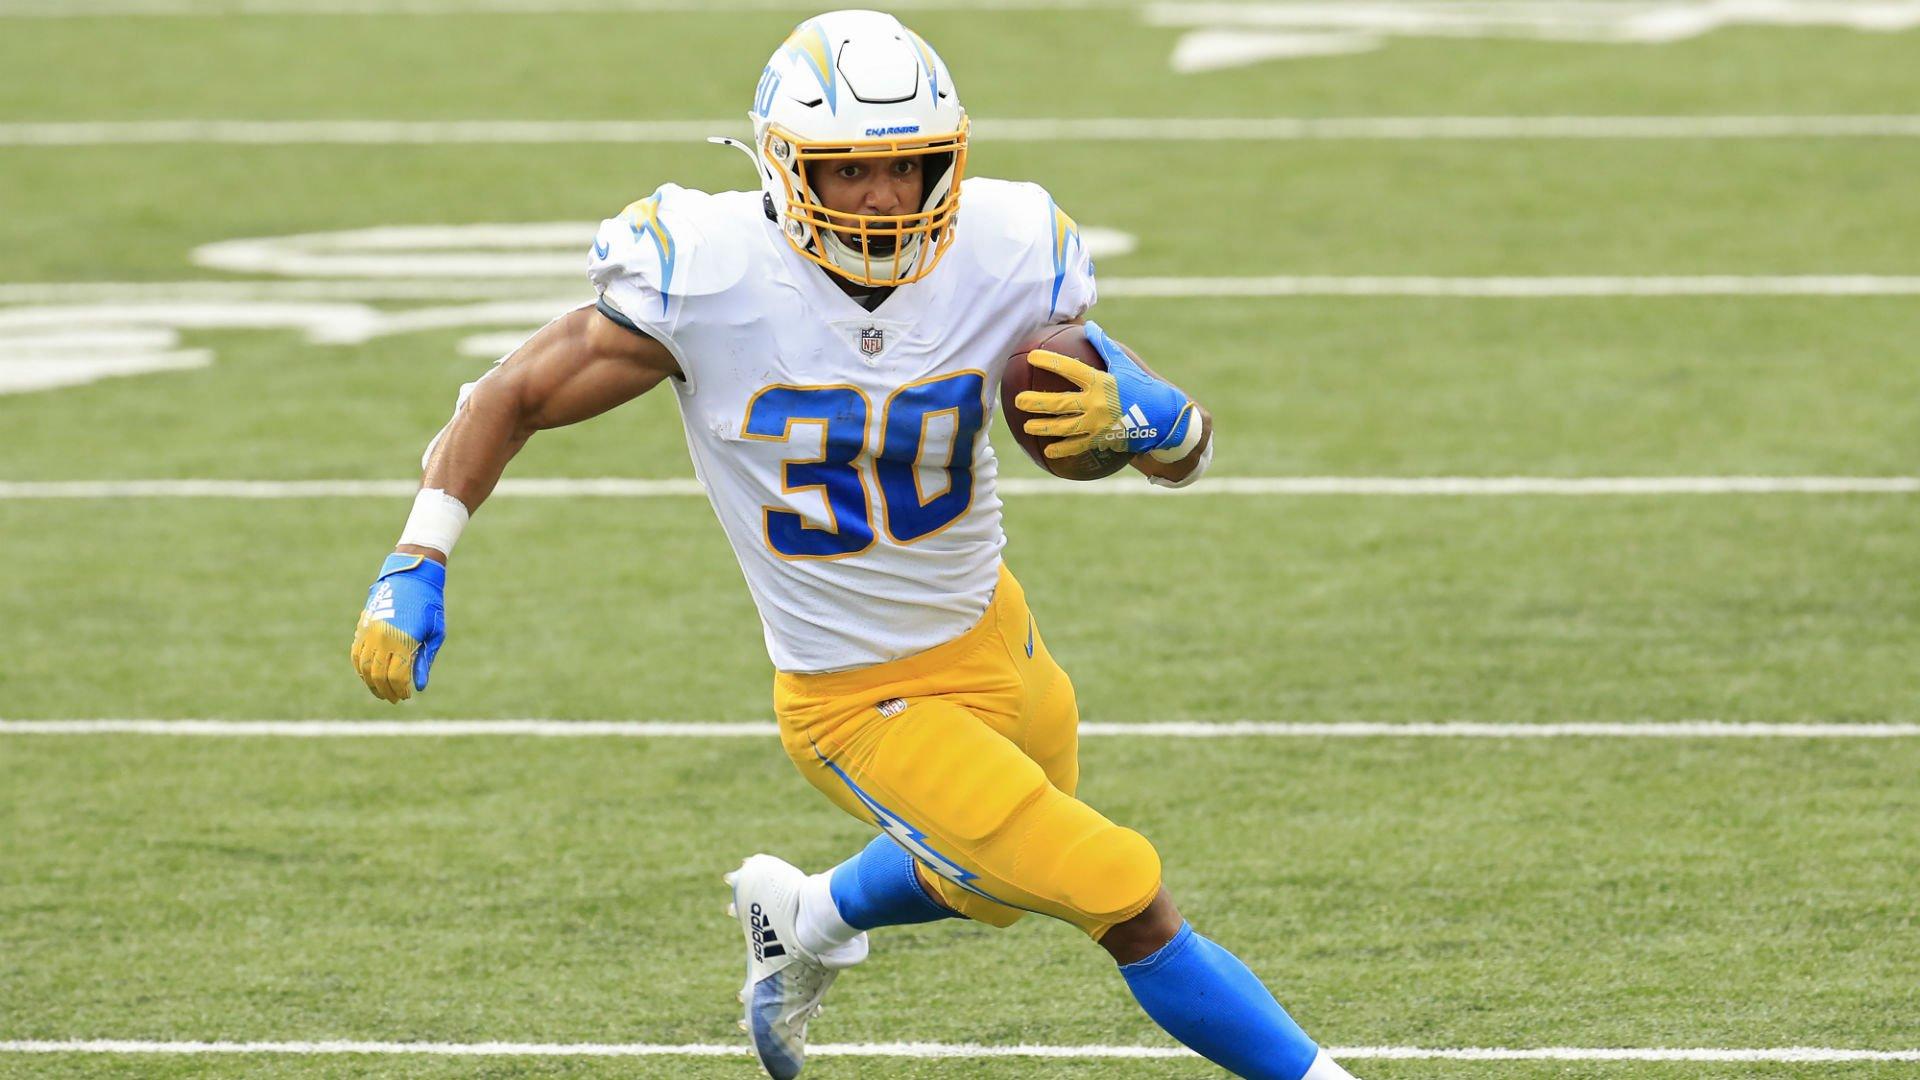 Denver Broncos vs Los Angeles Chargers Prediction and Best Bet: Bank on Chargers to Boost Postseason Hopes With Win Over Rival Broncos